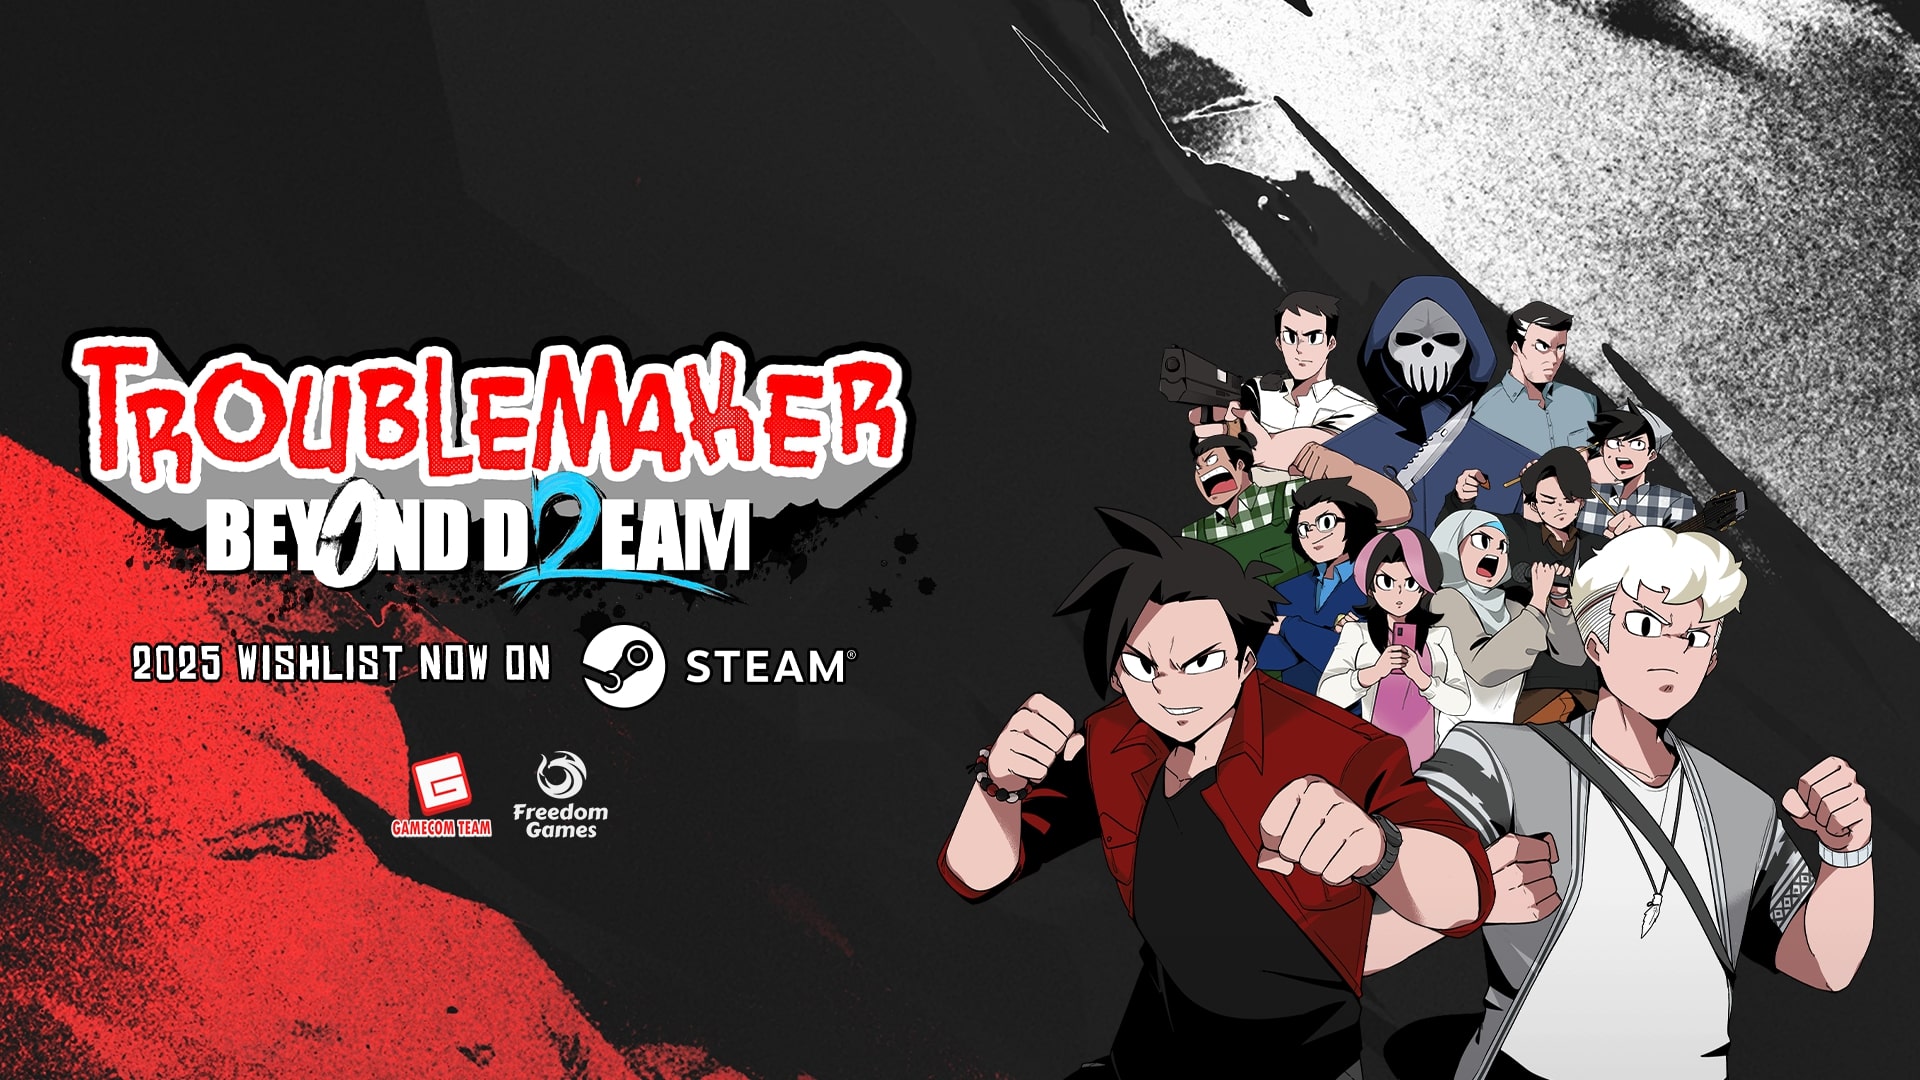 Troublemaker 2: Beyond Dream announced